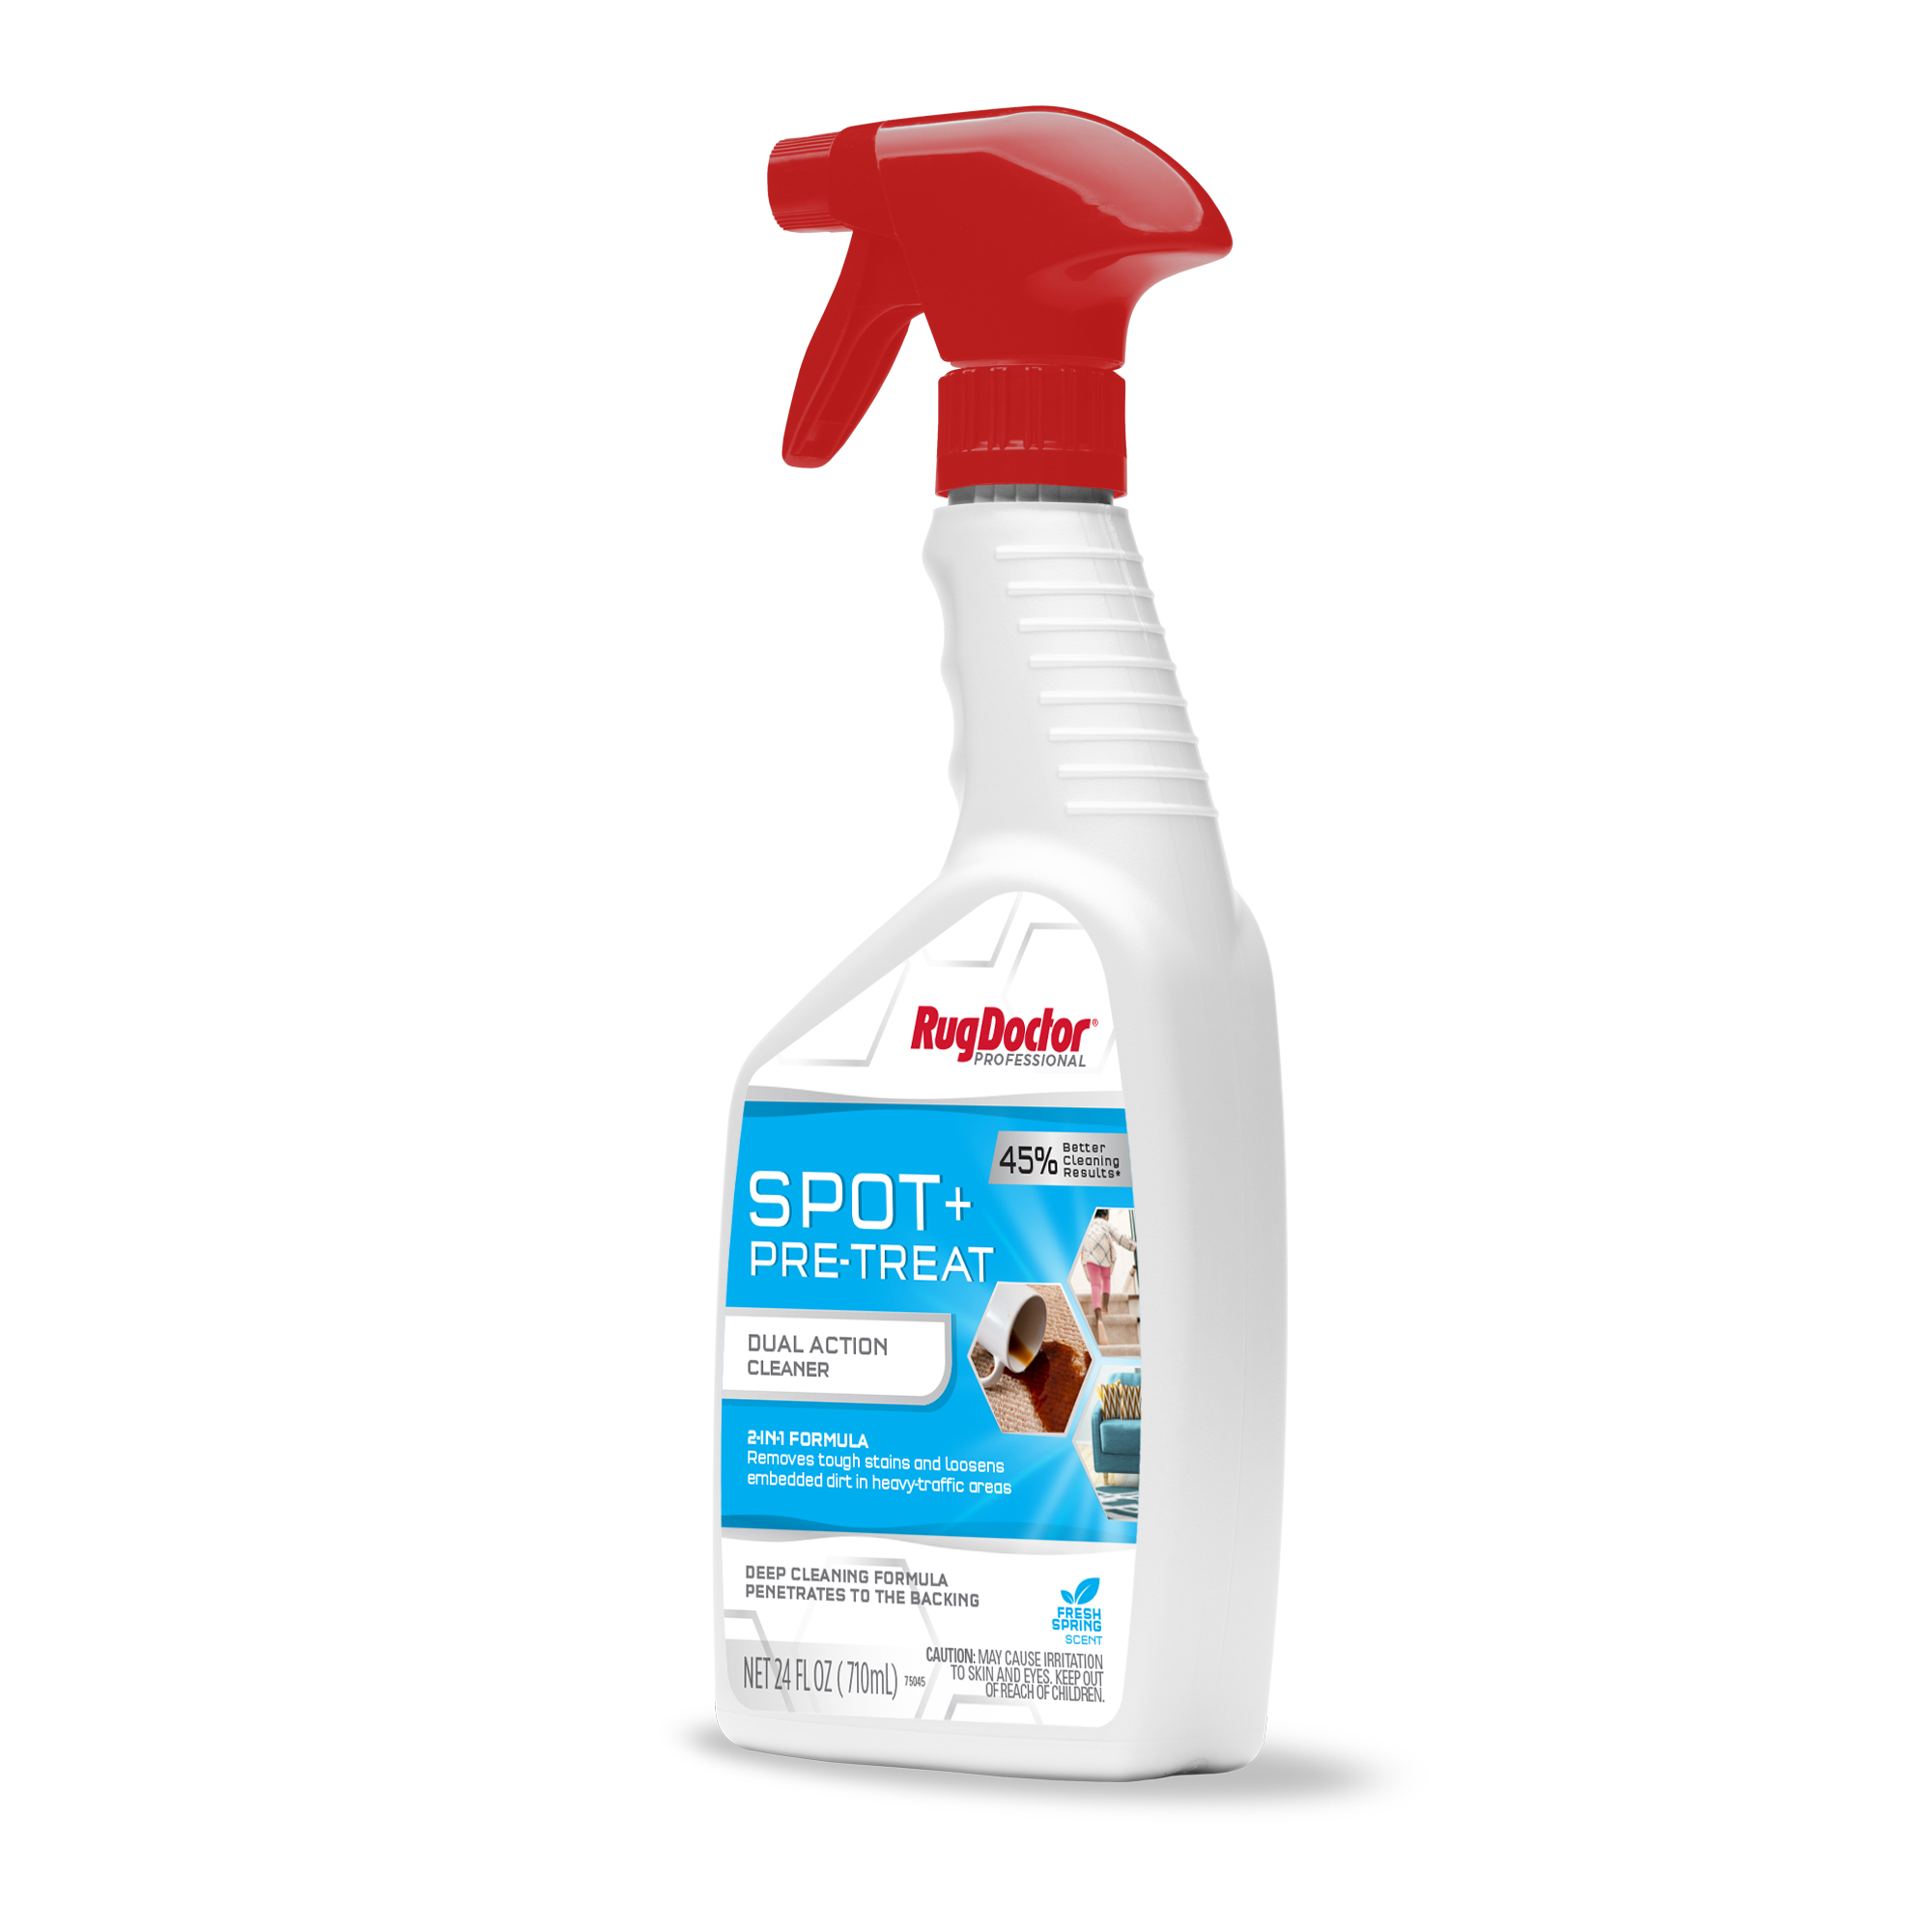 Carpet & Upholstery Cleaner: This Fast Acting Deep Cleaning Spot & Stain Remover Spray